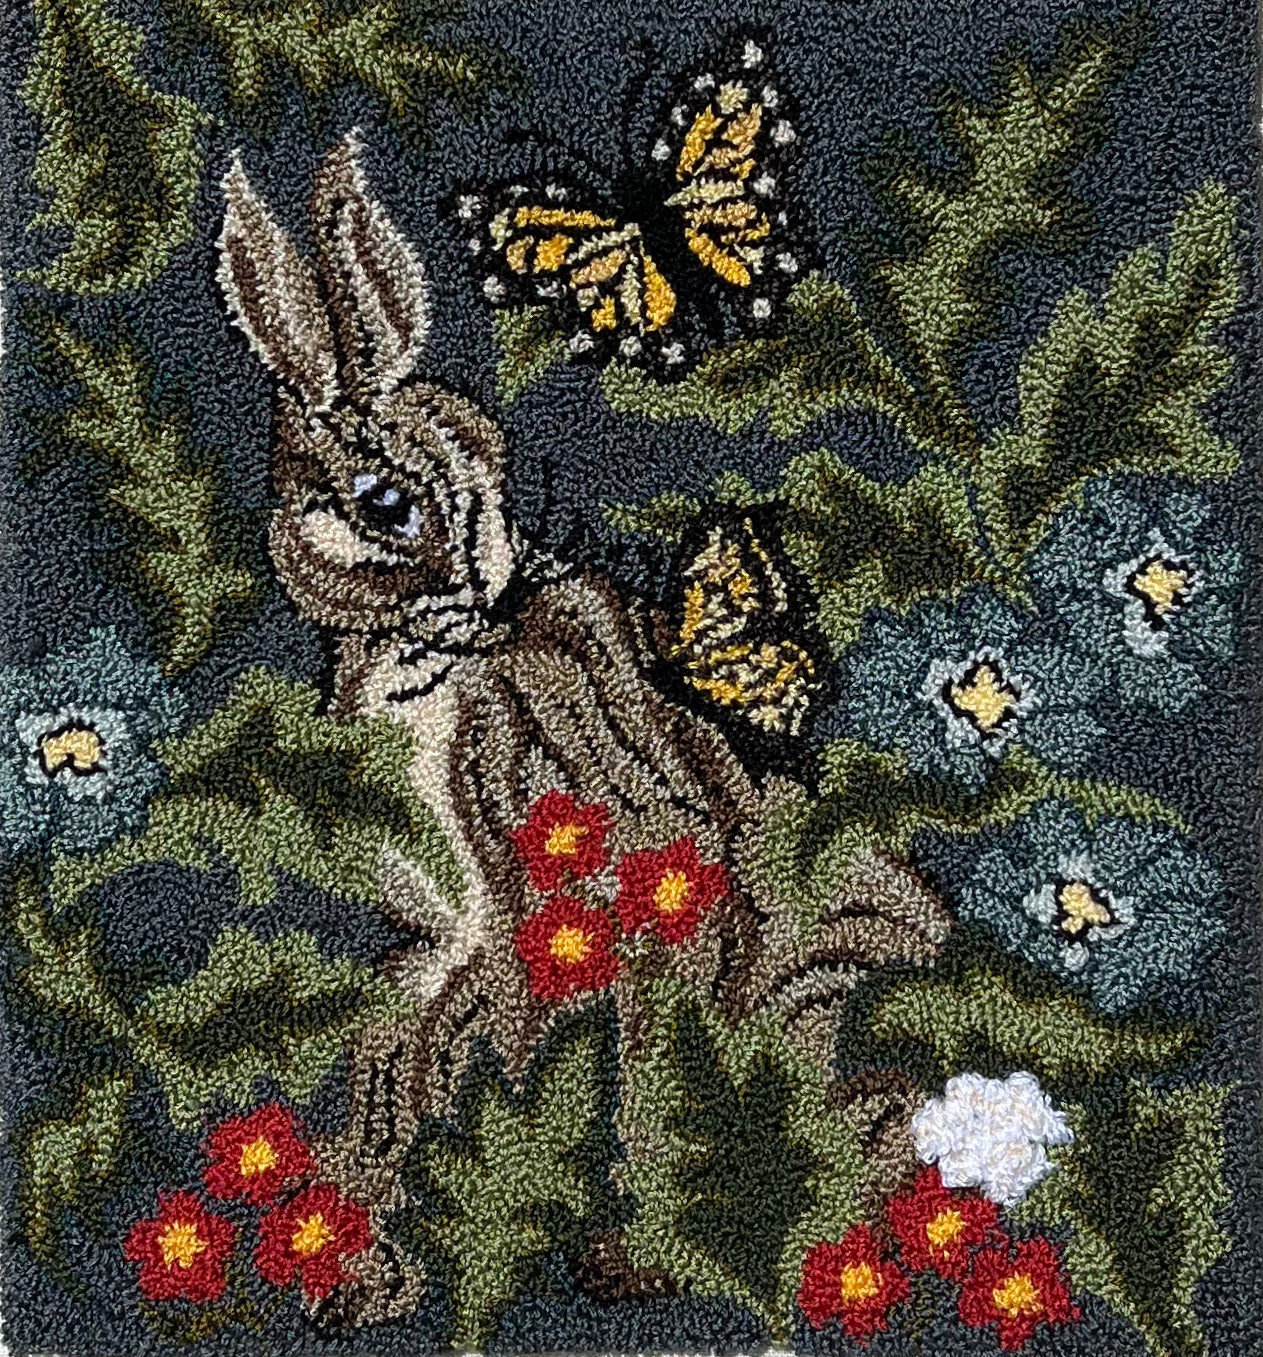 Hare with Friends, Rug Hooking pattern of natural linen. Perect for the rug hooking or rug punch needle artist. Pattern by Orphaned Wool. Lovely bunny and butterfly design with flowers and leaves.